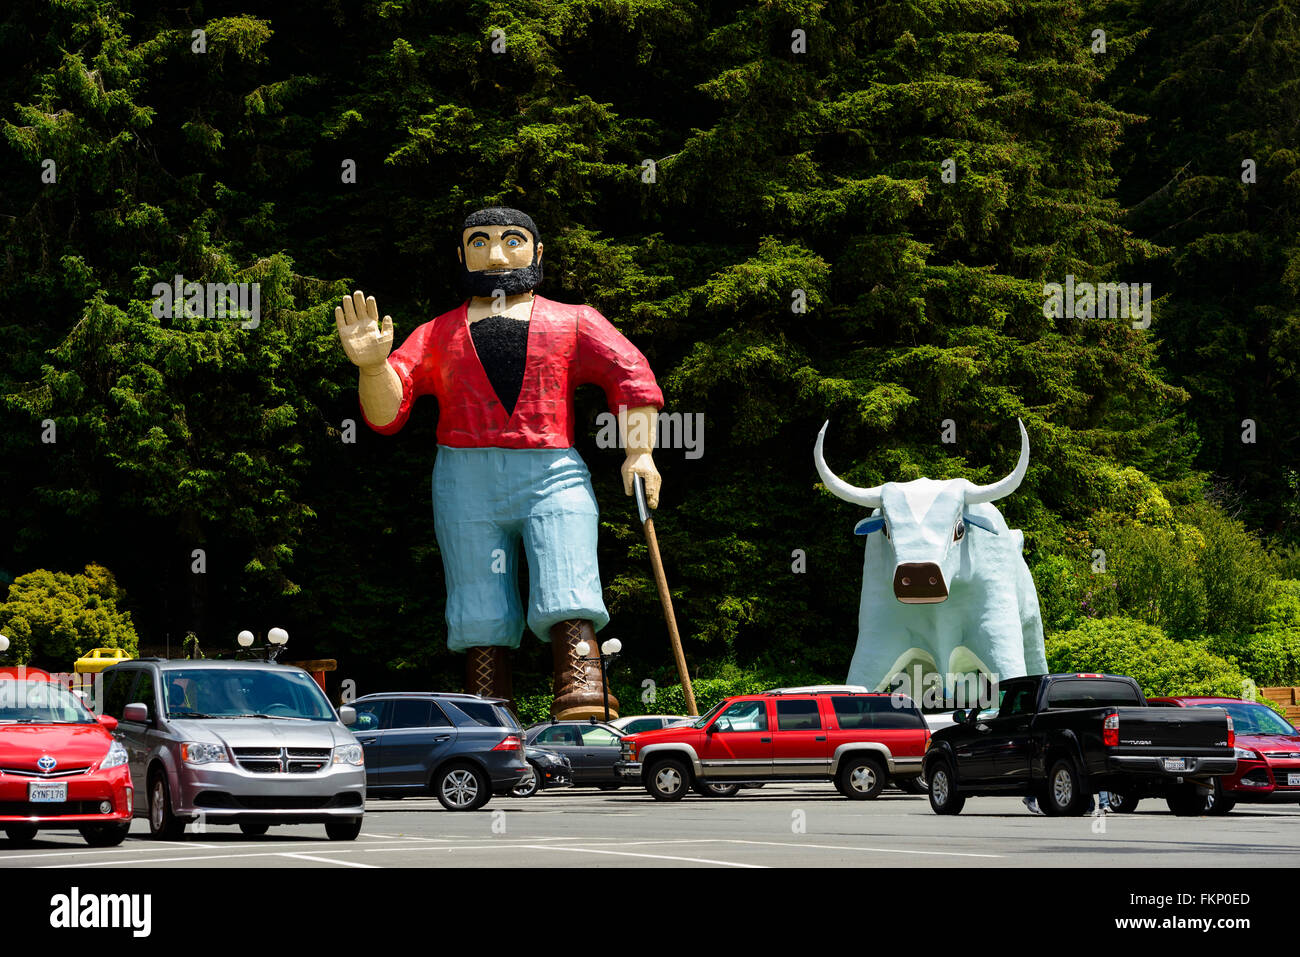 Paul Bunyan & Babe giant talking statue at the entrance to the Trees of Mystery park in Klamath, California, USA. Stock Photo